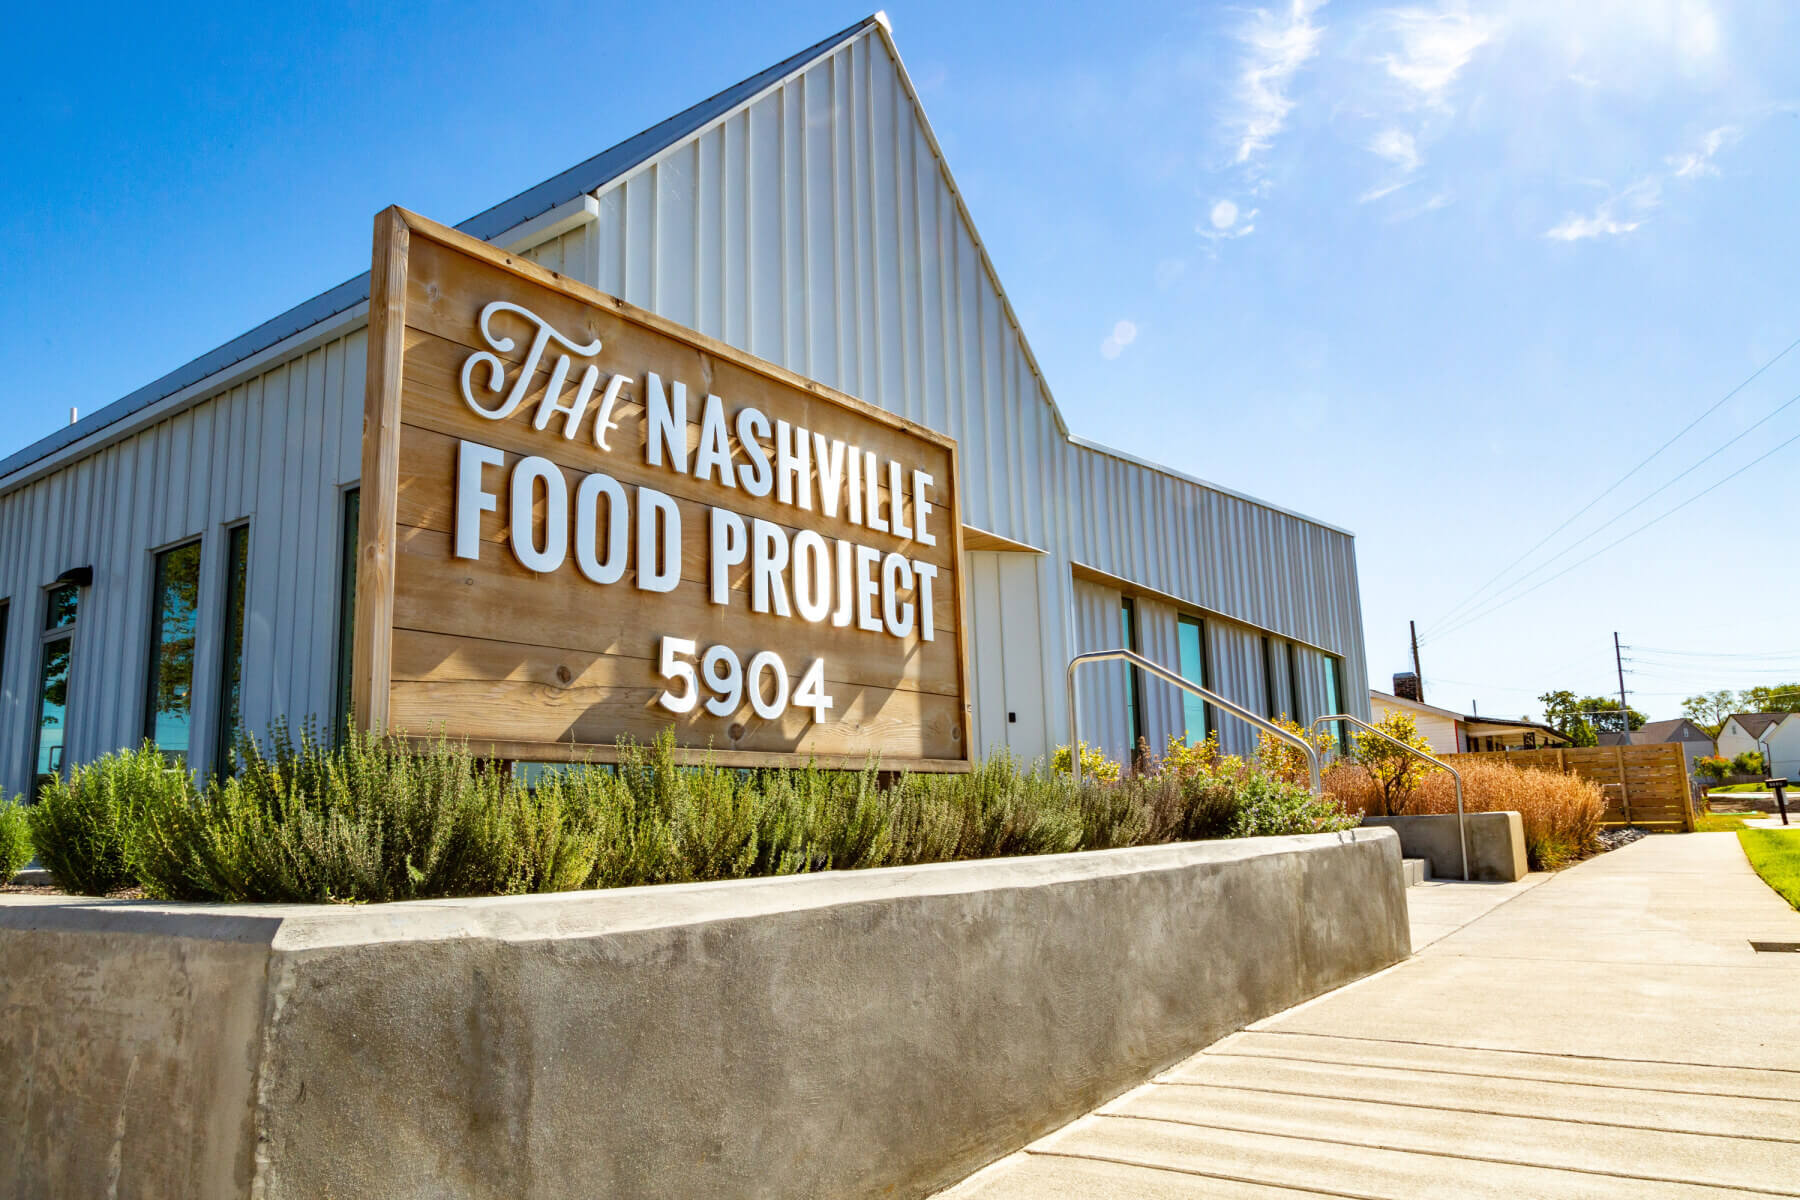 The exterior of the Nashville Food Project with large branded sign